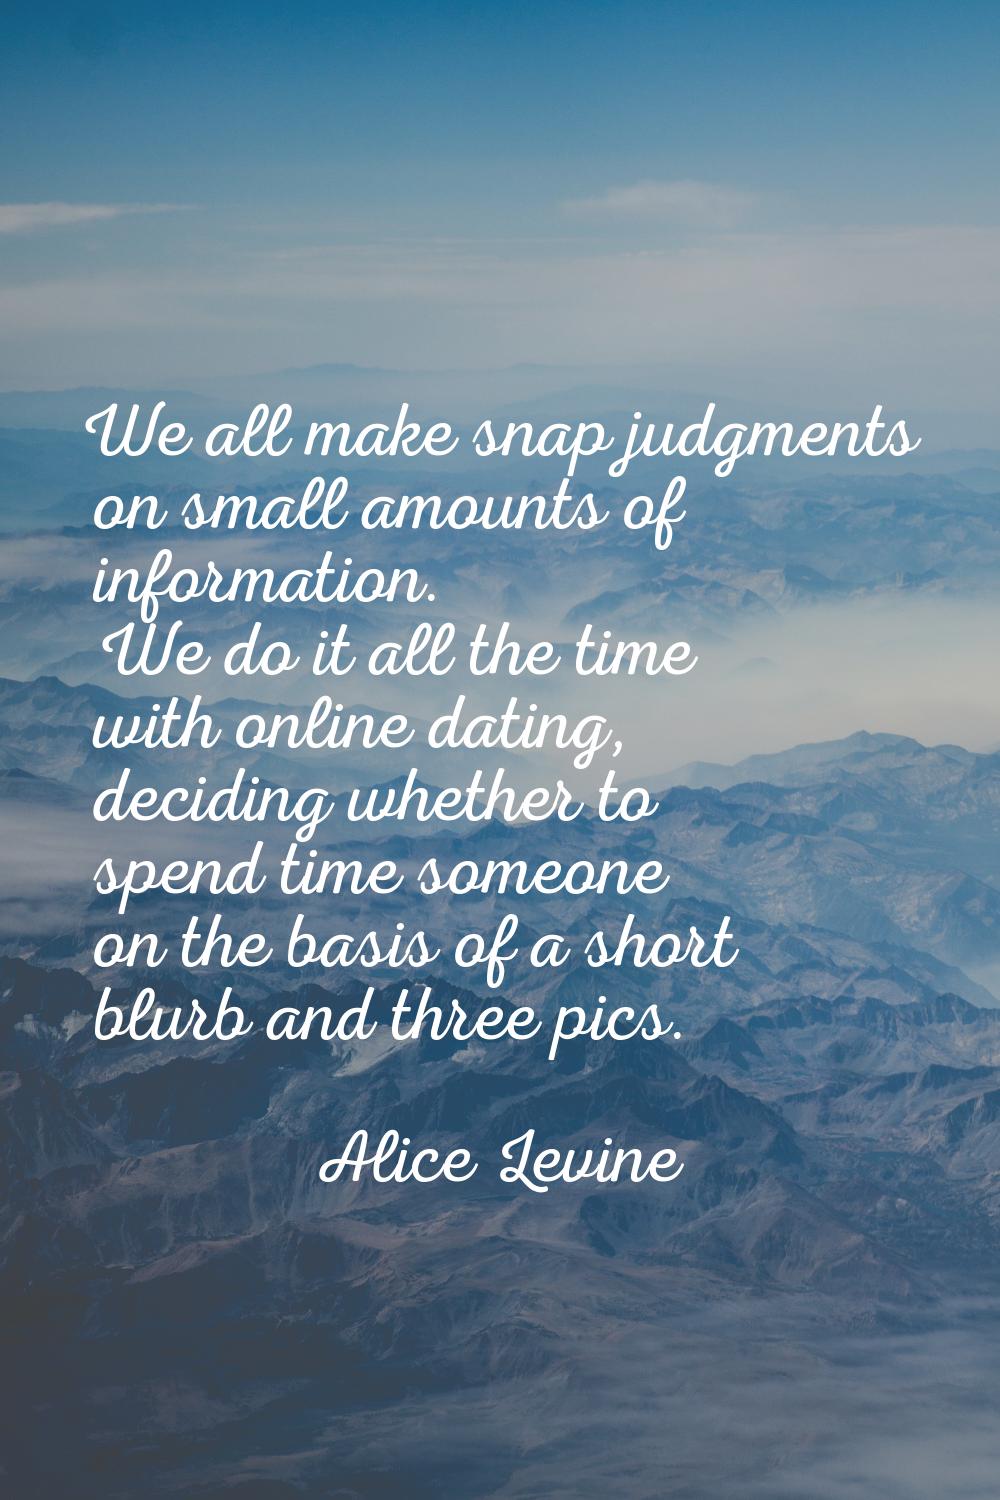 We all make snap judgments on small amounts of information. We do it all the time with online datin